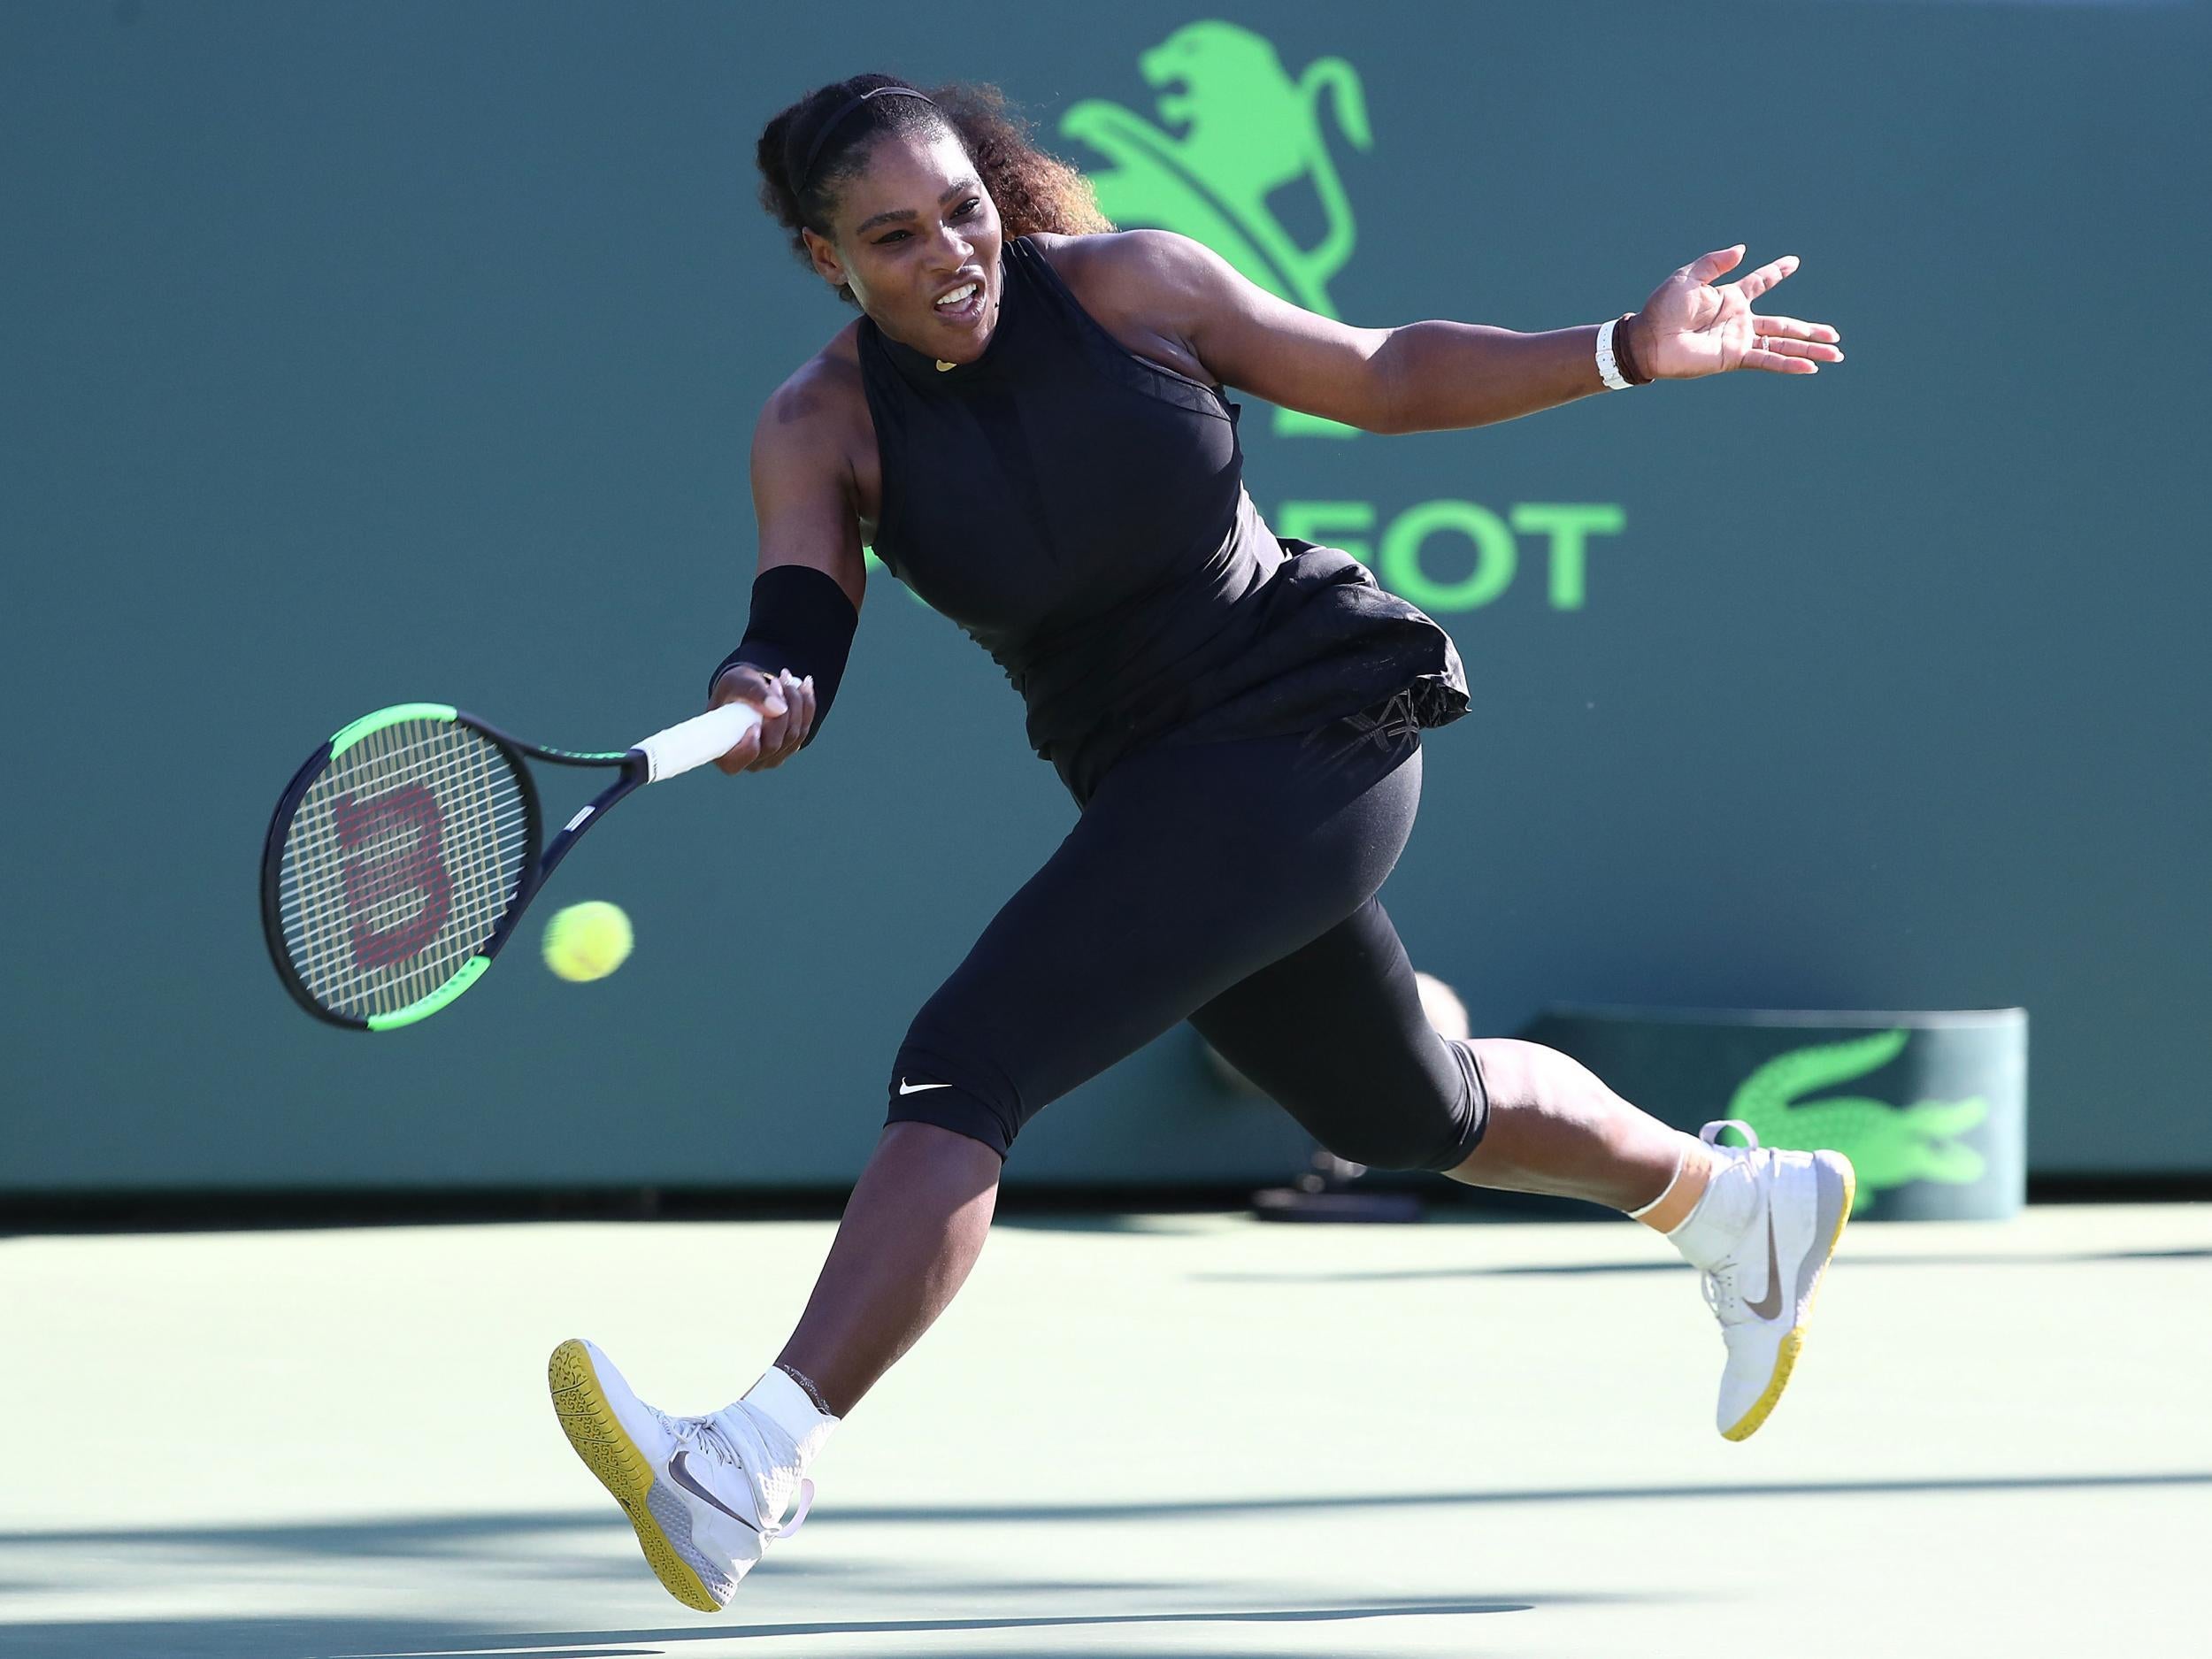 Williams was no match for her 20-year-old opponent